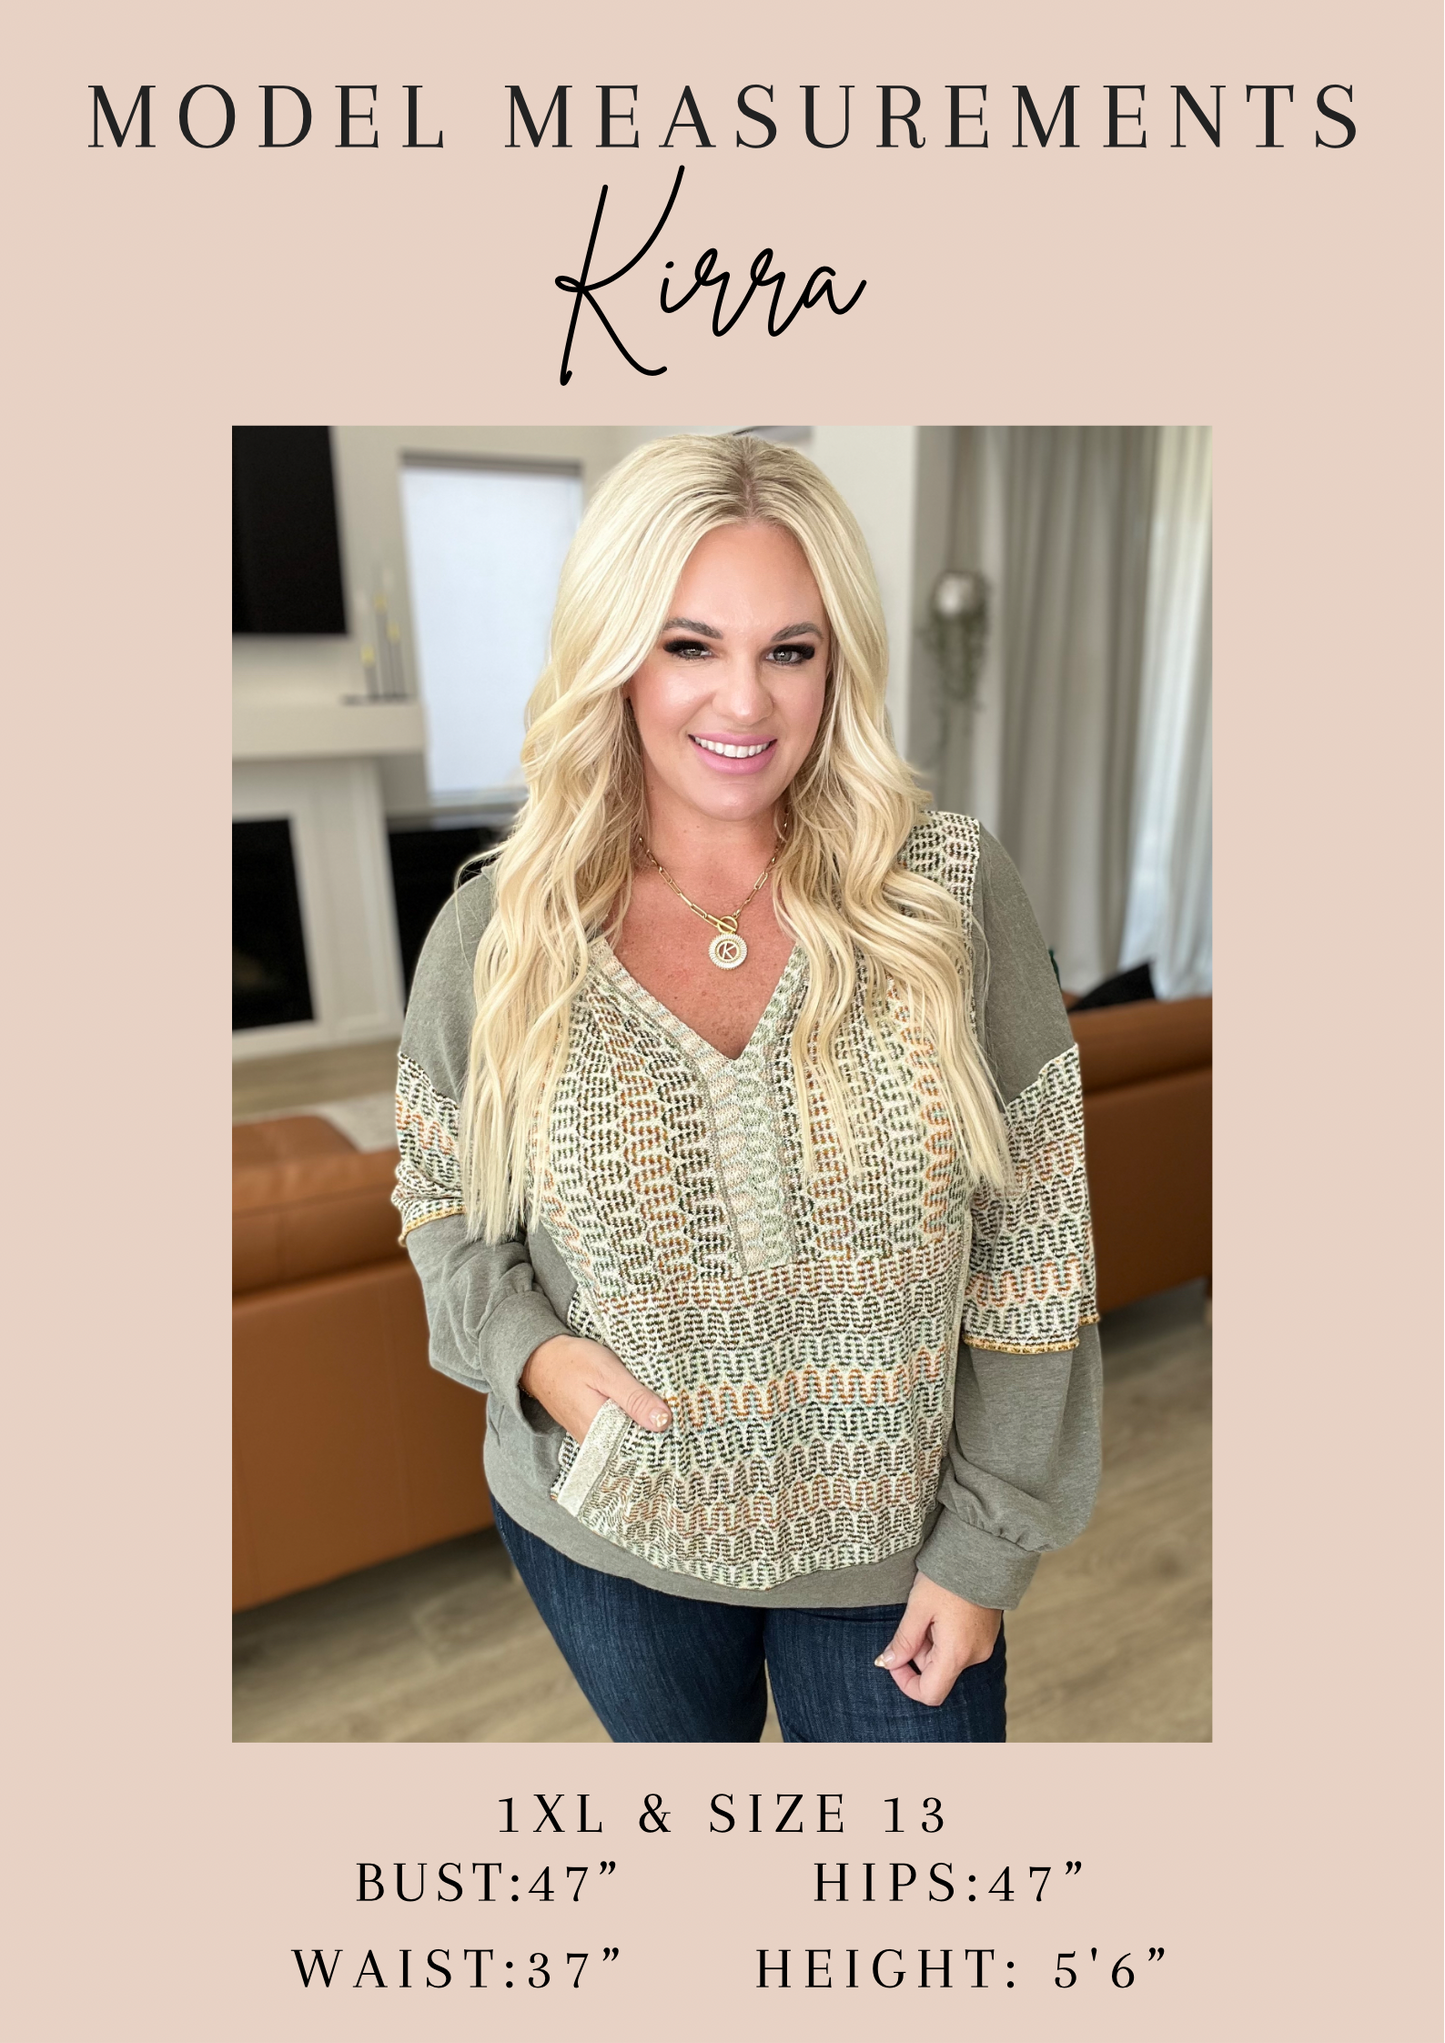 Ribbed Brushed Hacci Sweater in Light Teal - Southern Divas Boutique